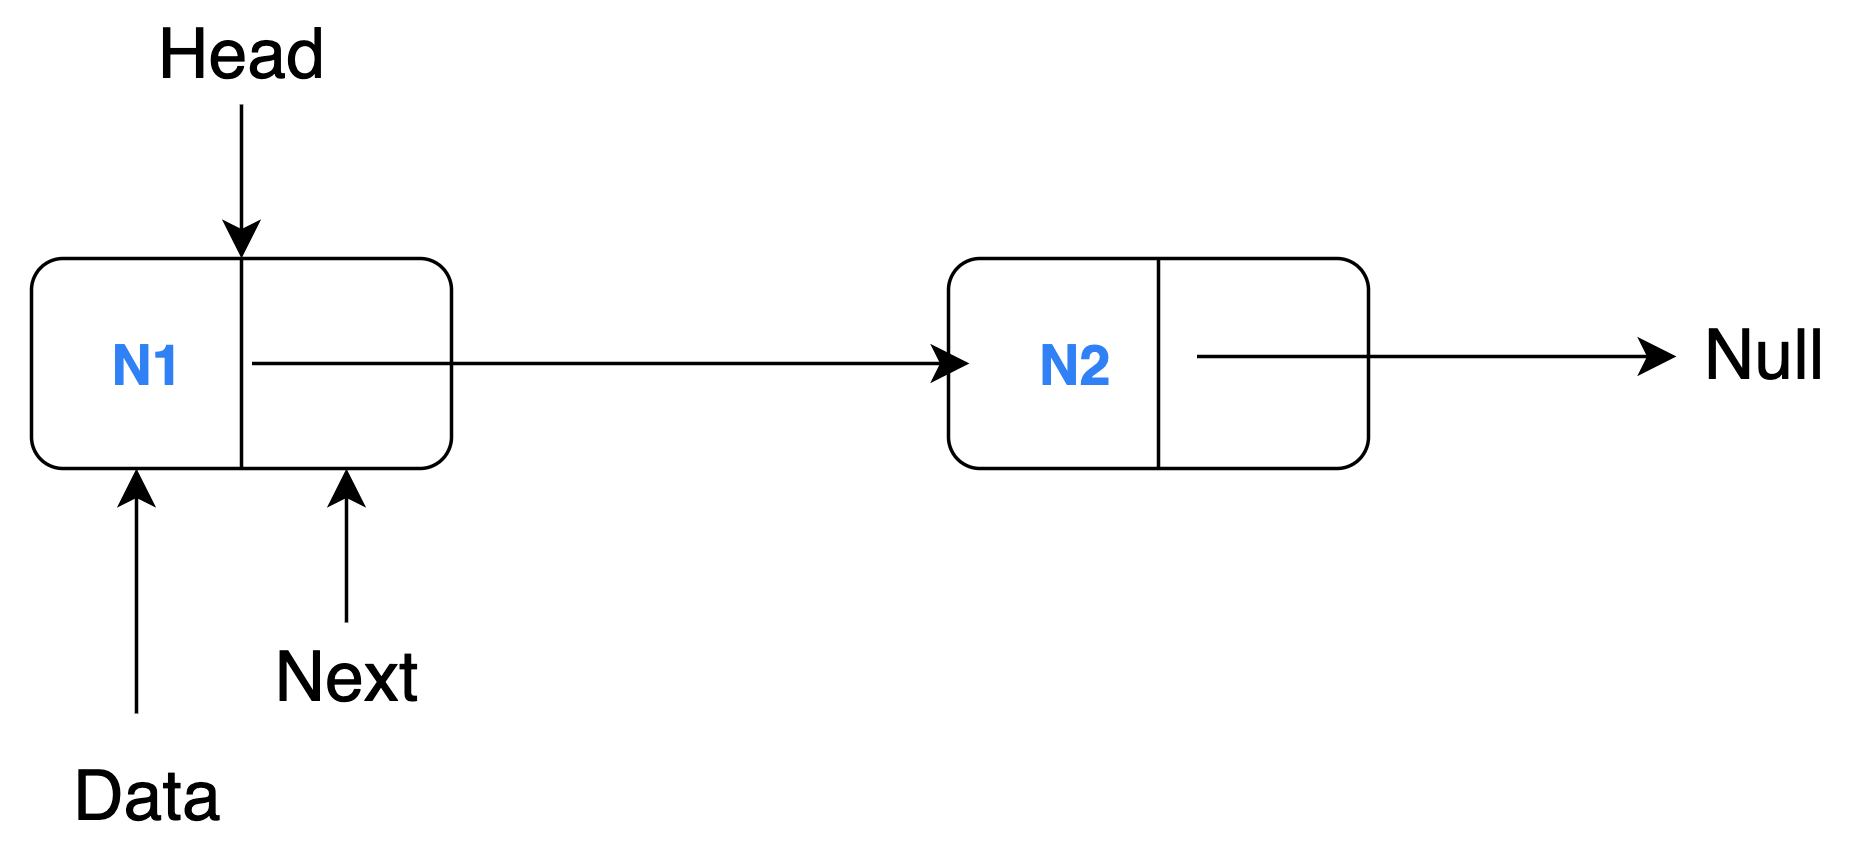 Linked list in the source model